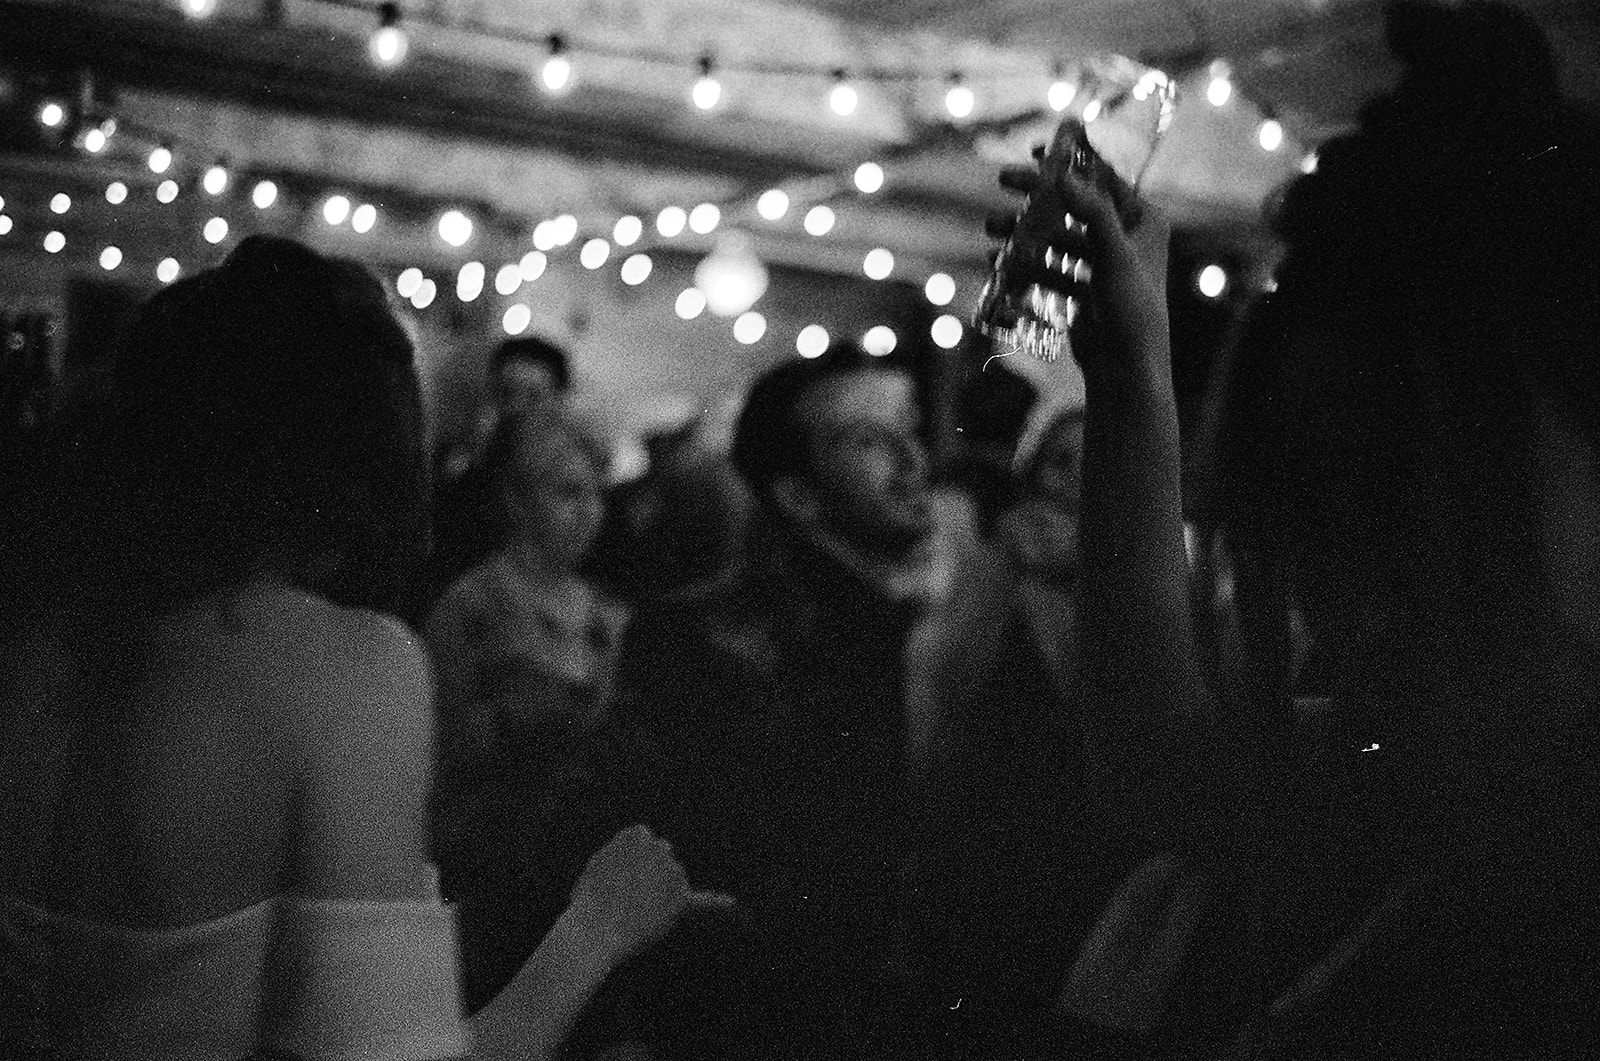 dance floor black and white 35mm film photography